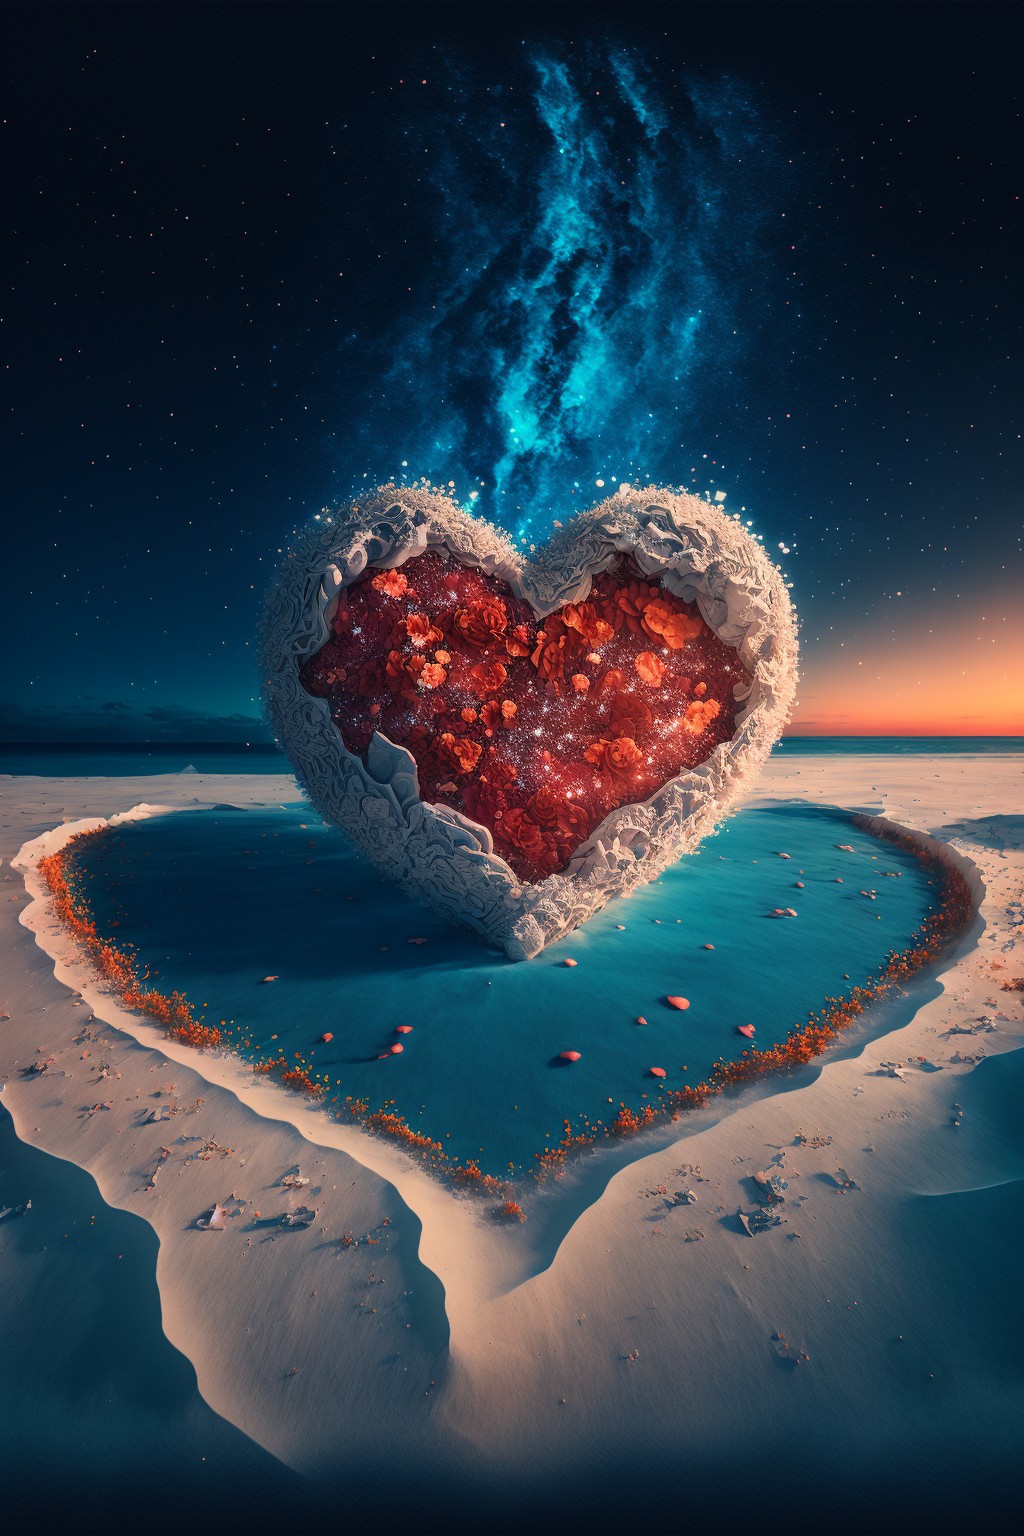 Heart-shaped roses under the starry sky and snow